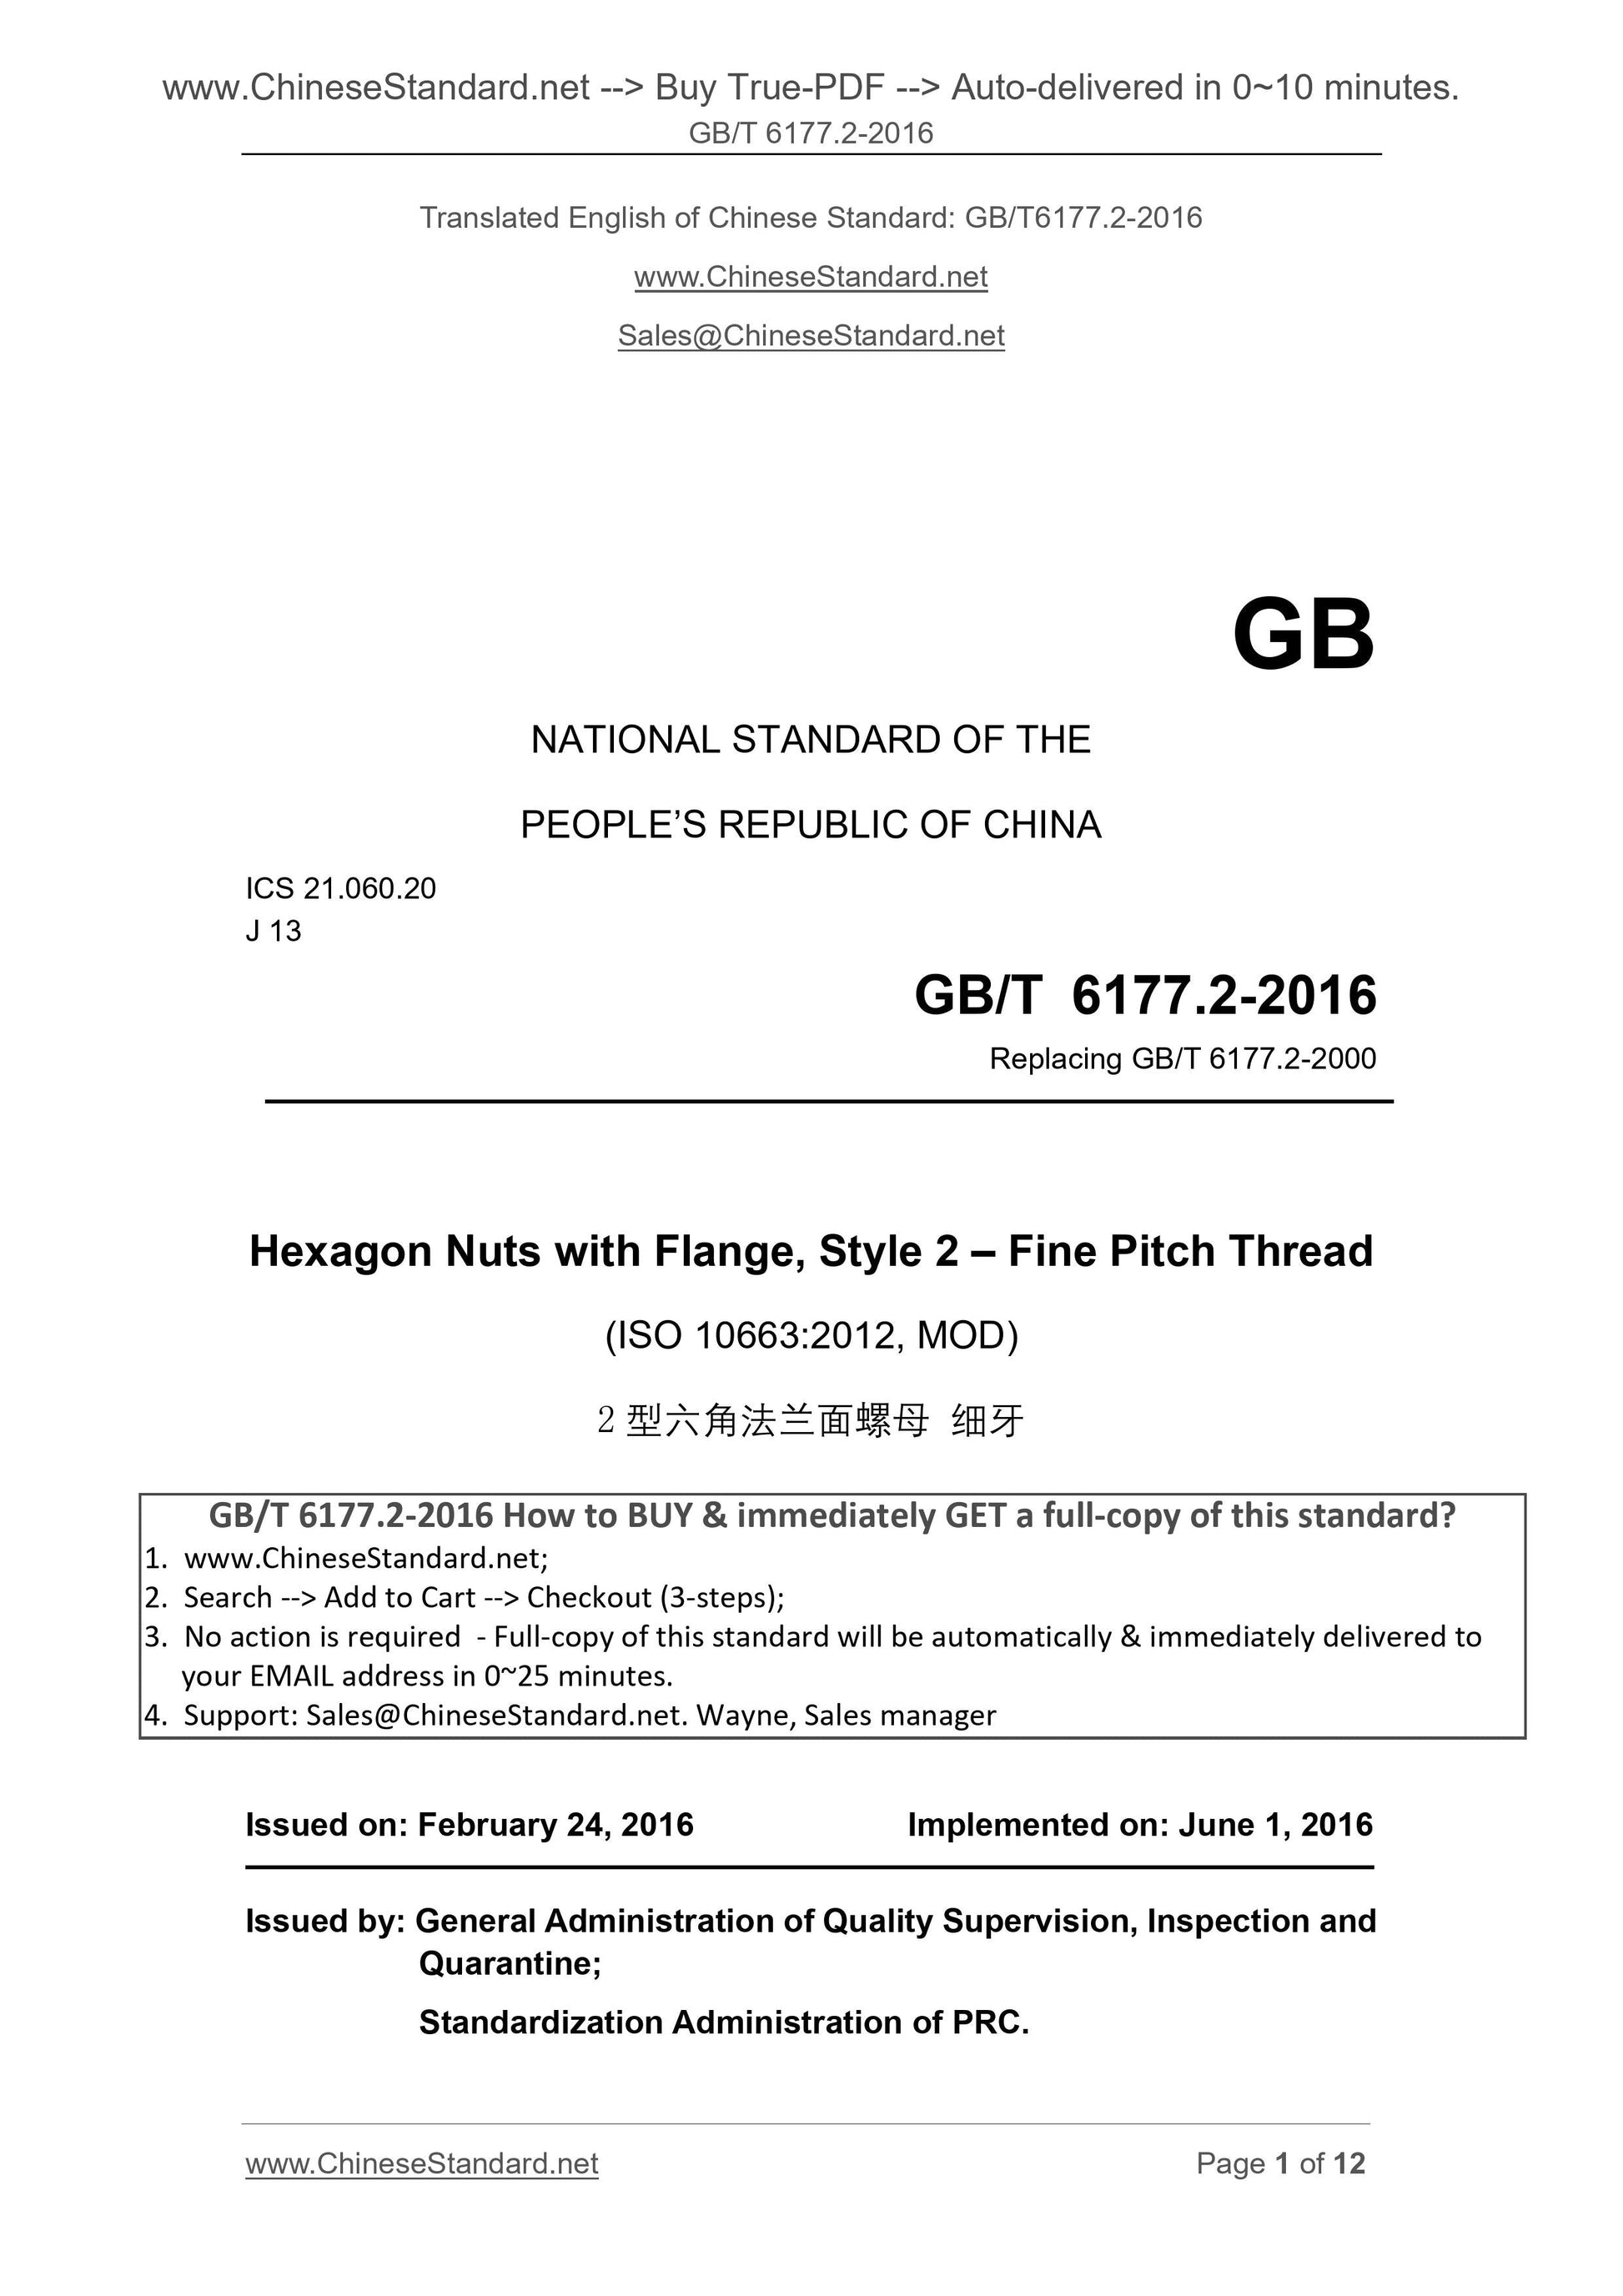 GB/T 6177.2-2016 Page 1